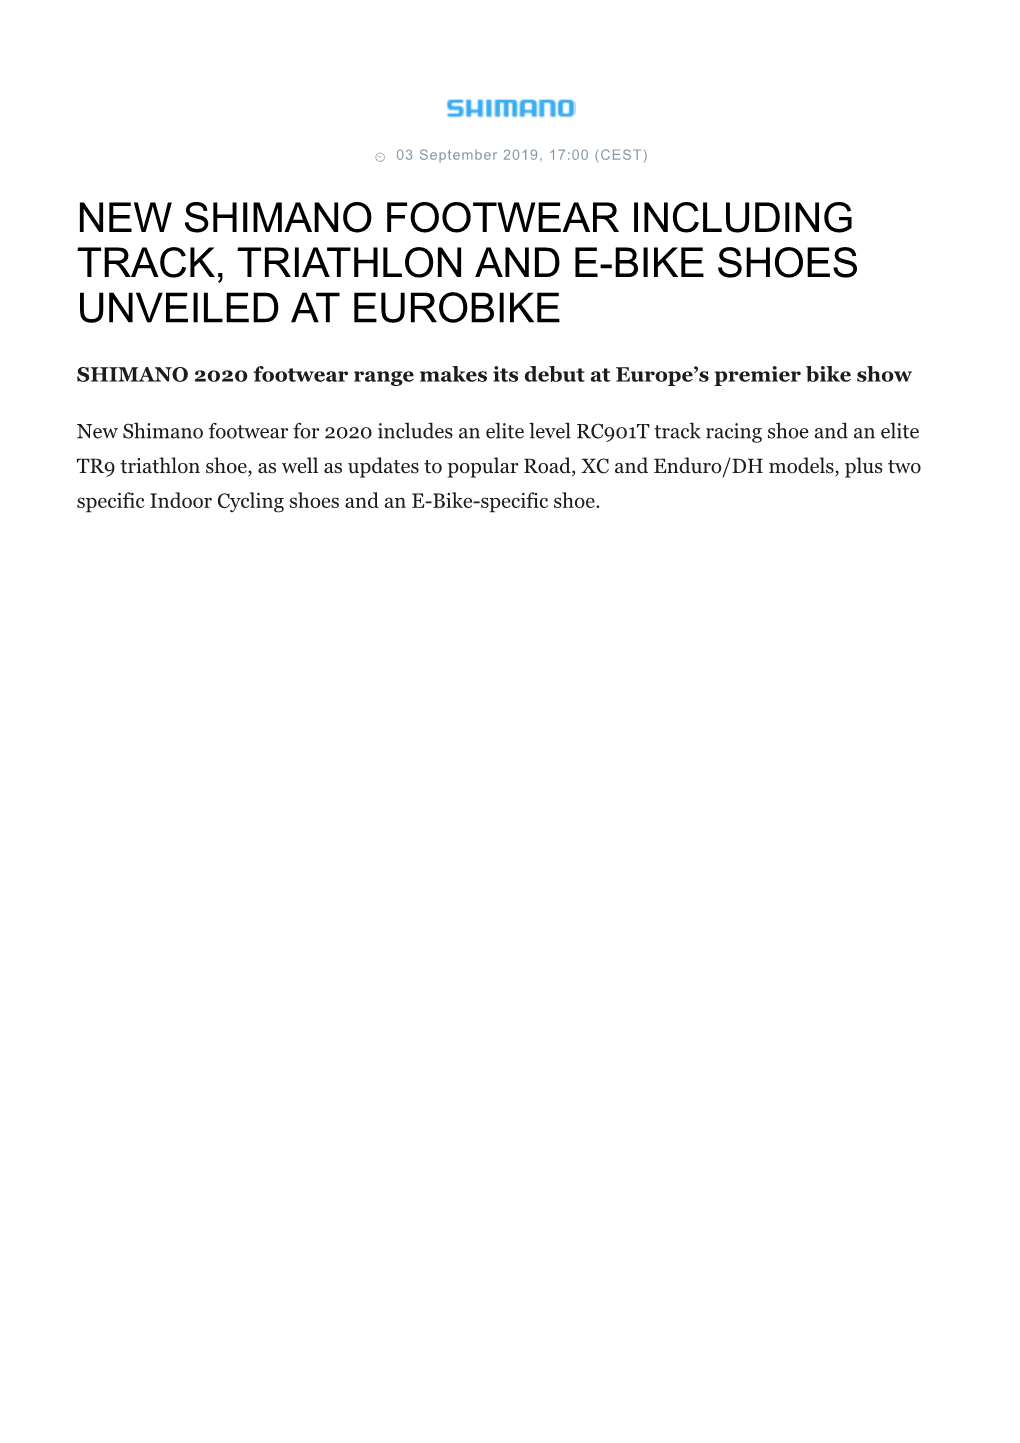 New Shimano Footwear Including Track, Triathlon and E-Bike Shoes Unveiled at Eurobike